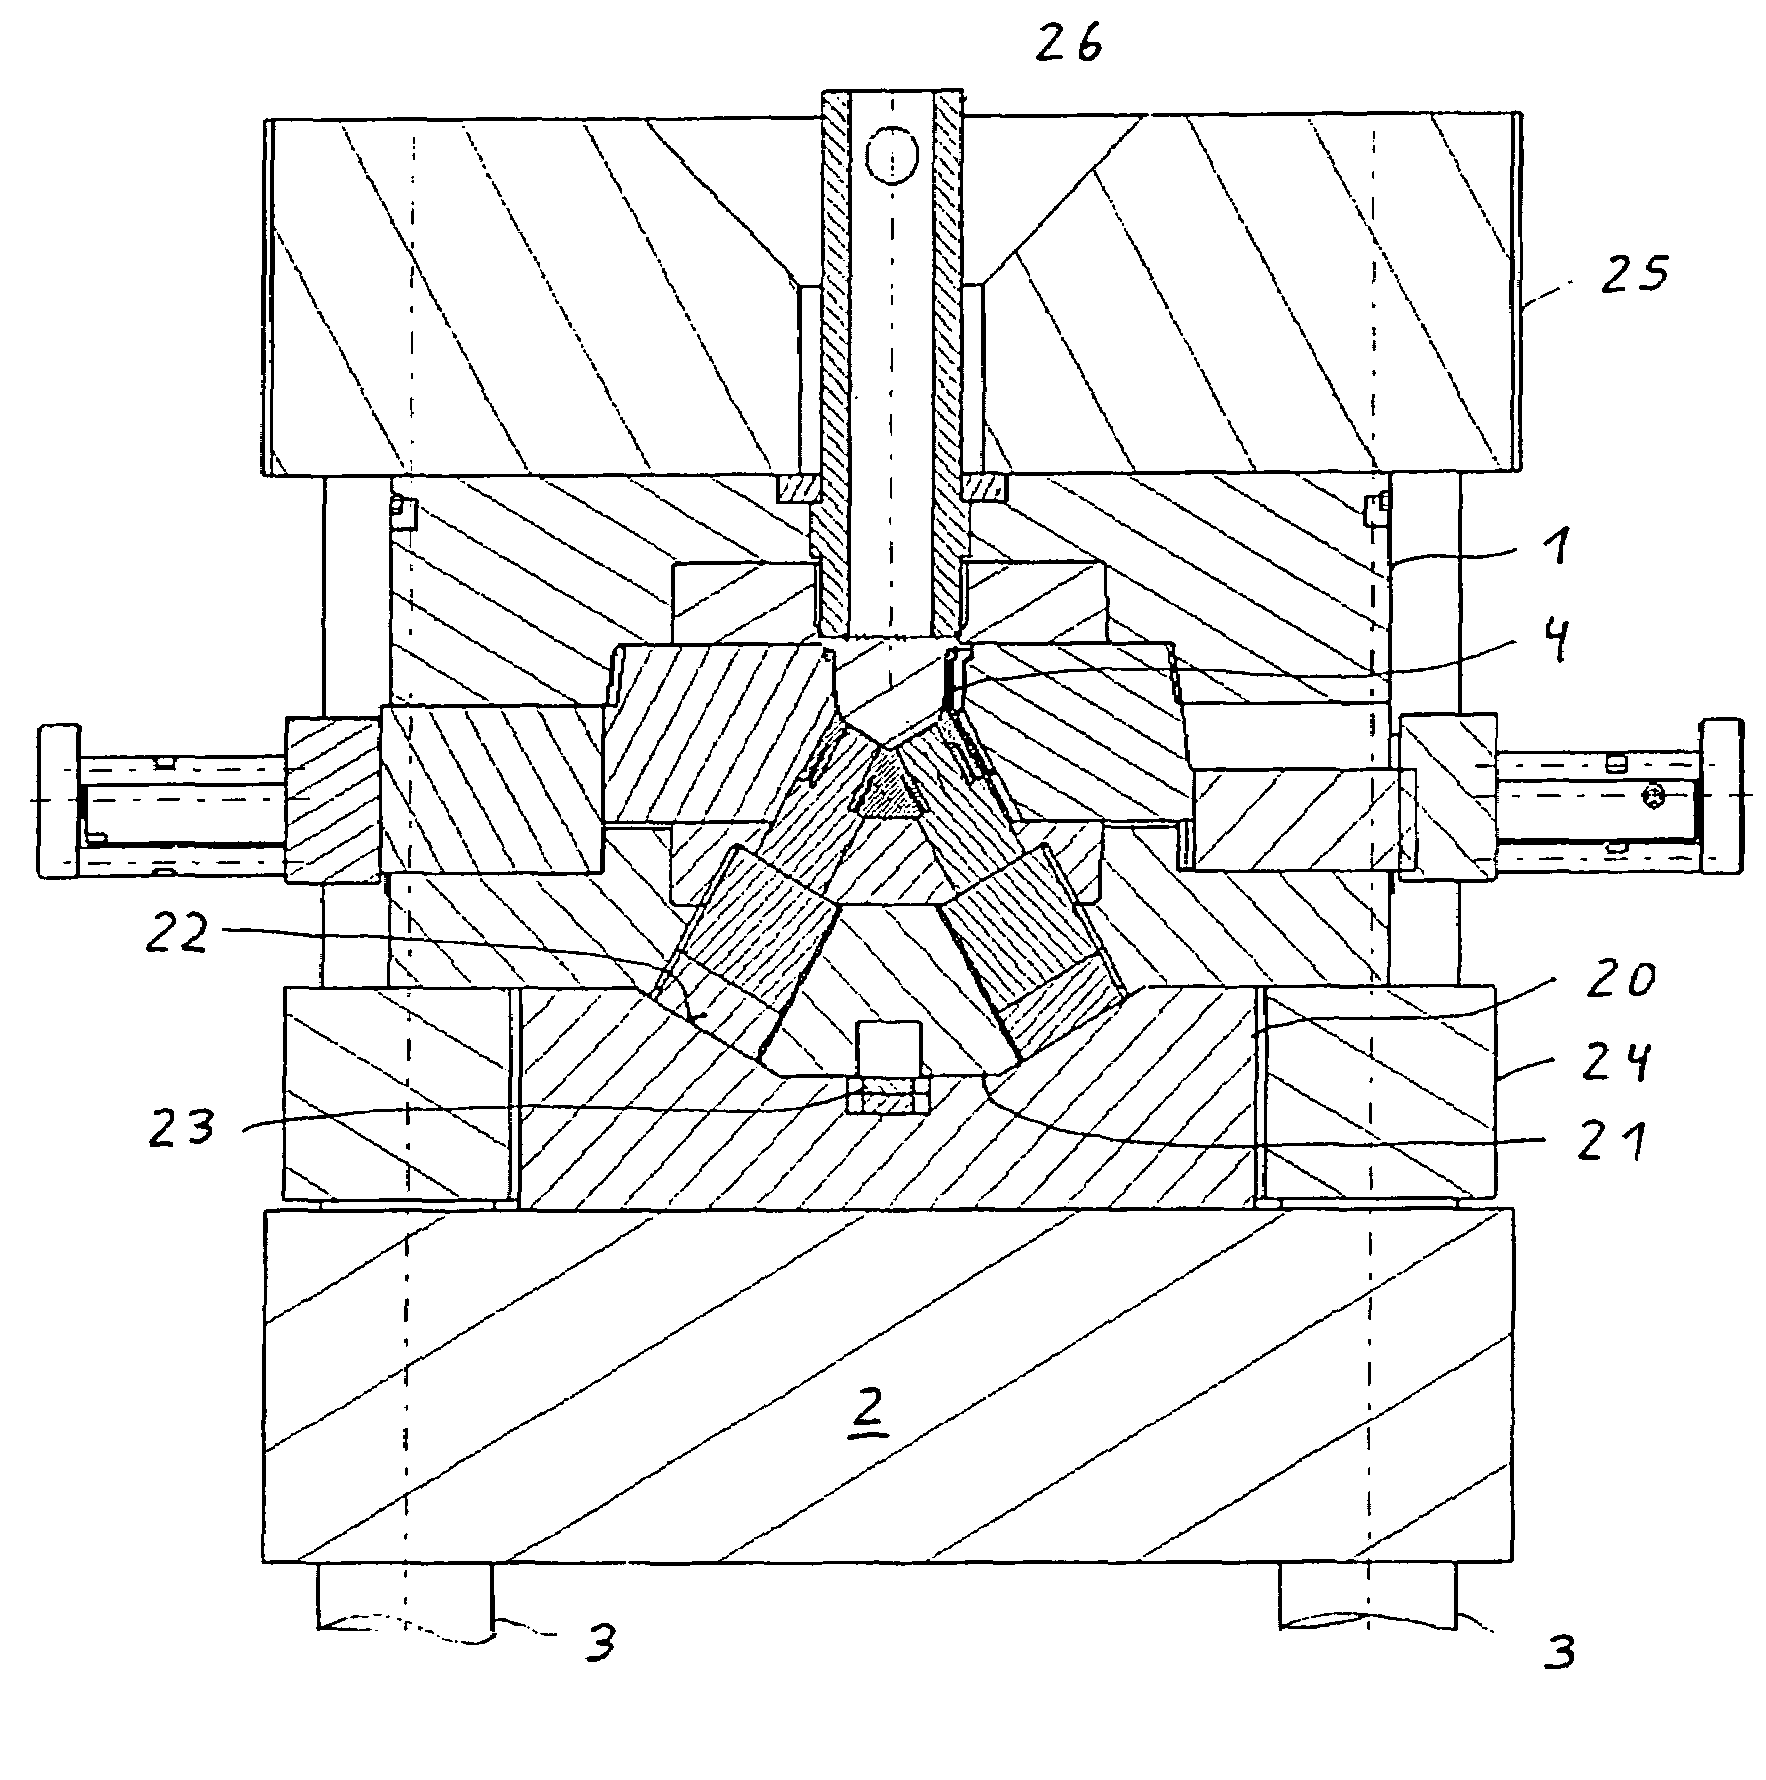 Injection-molding device for manufacturing V-engine blocks